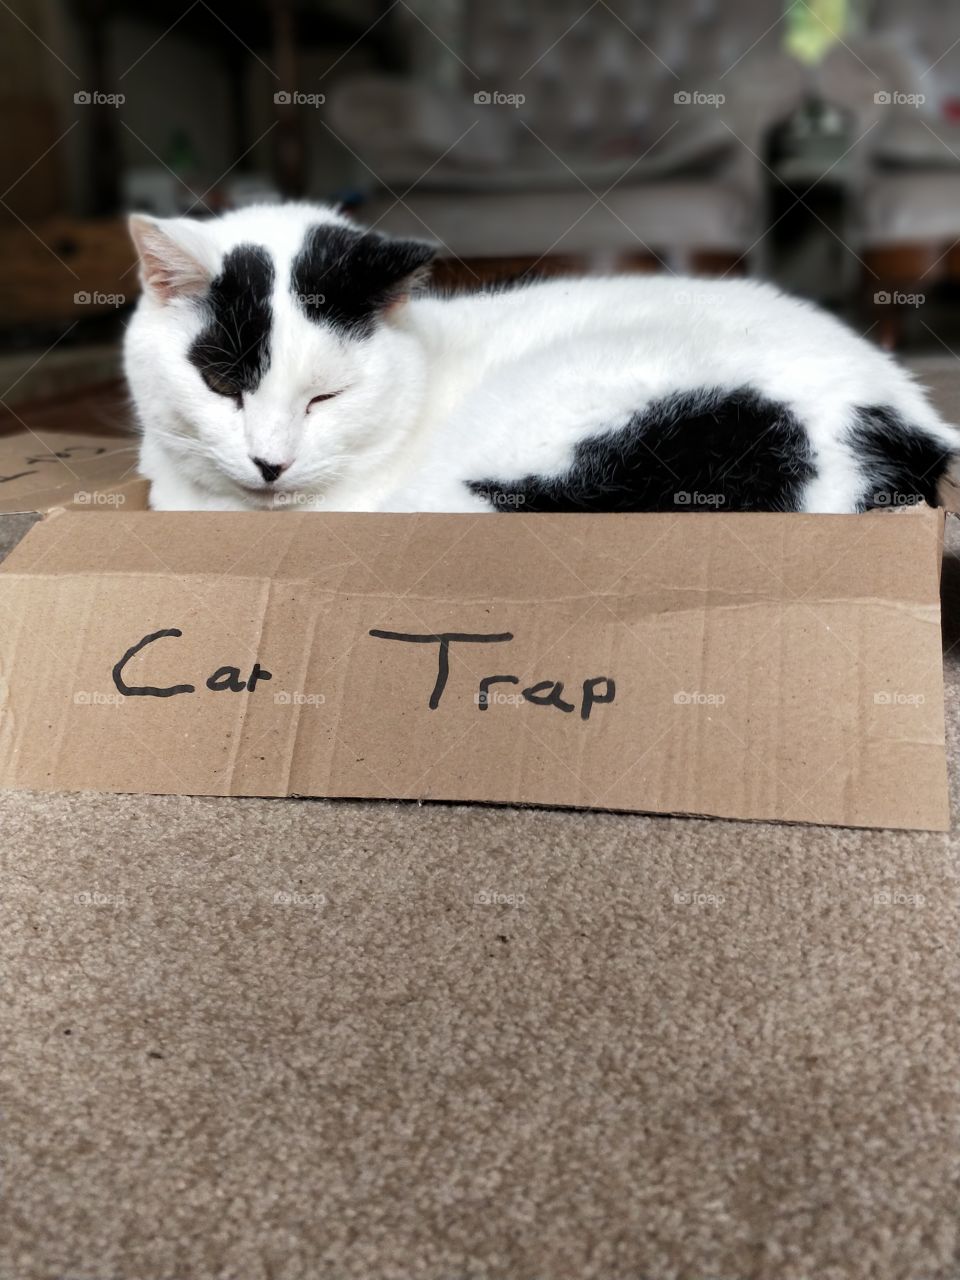 The cat traps are working!